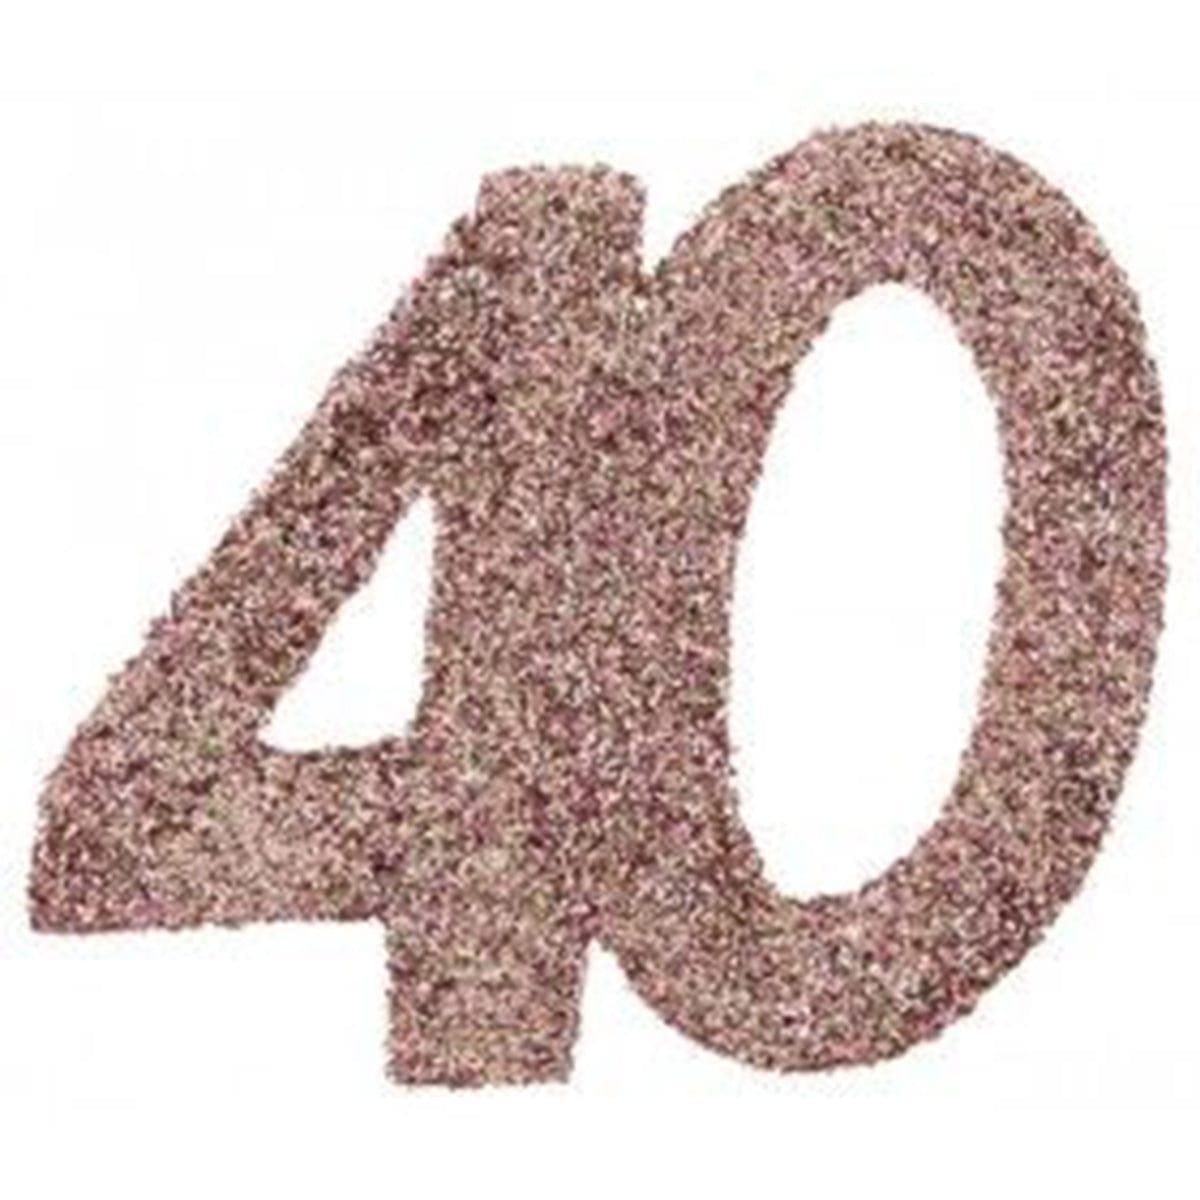 SANTEX Age Specific Birthday Glittery Number 40 Decoration, Rose Gold, 6 Count